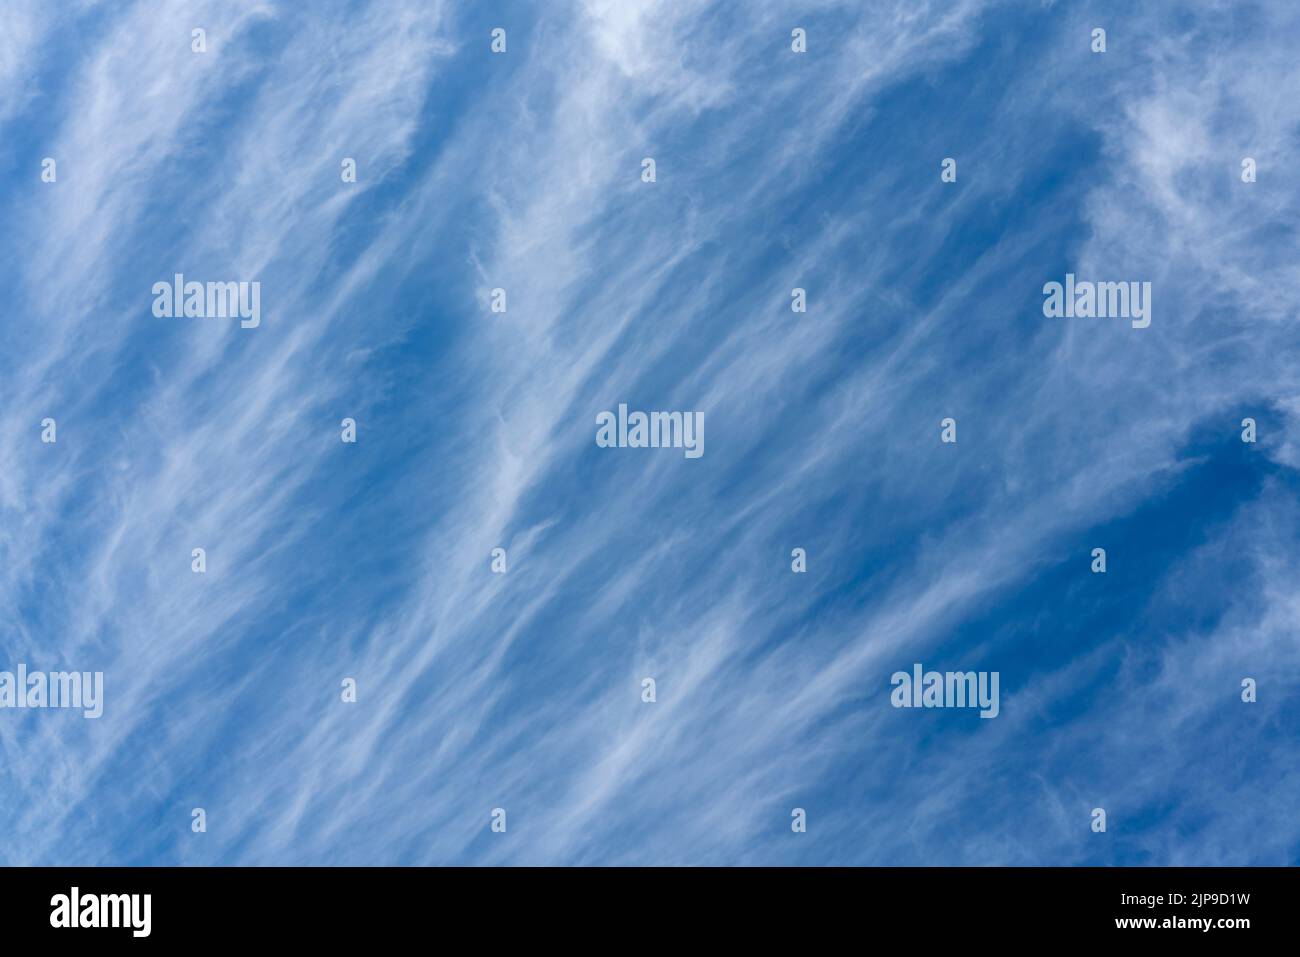 Dramatic cirrus white clouds on a blue sky for use as a cloudscape texture background, stock photo image Stock Photo